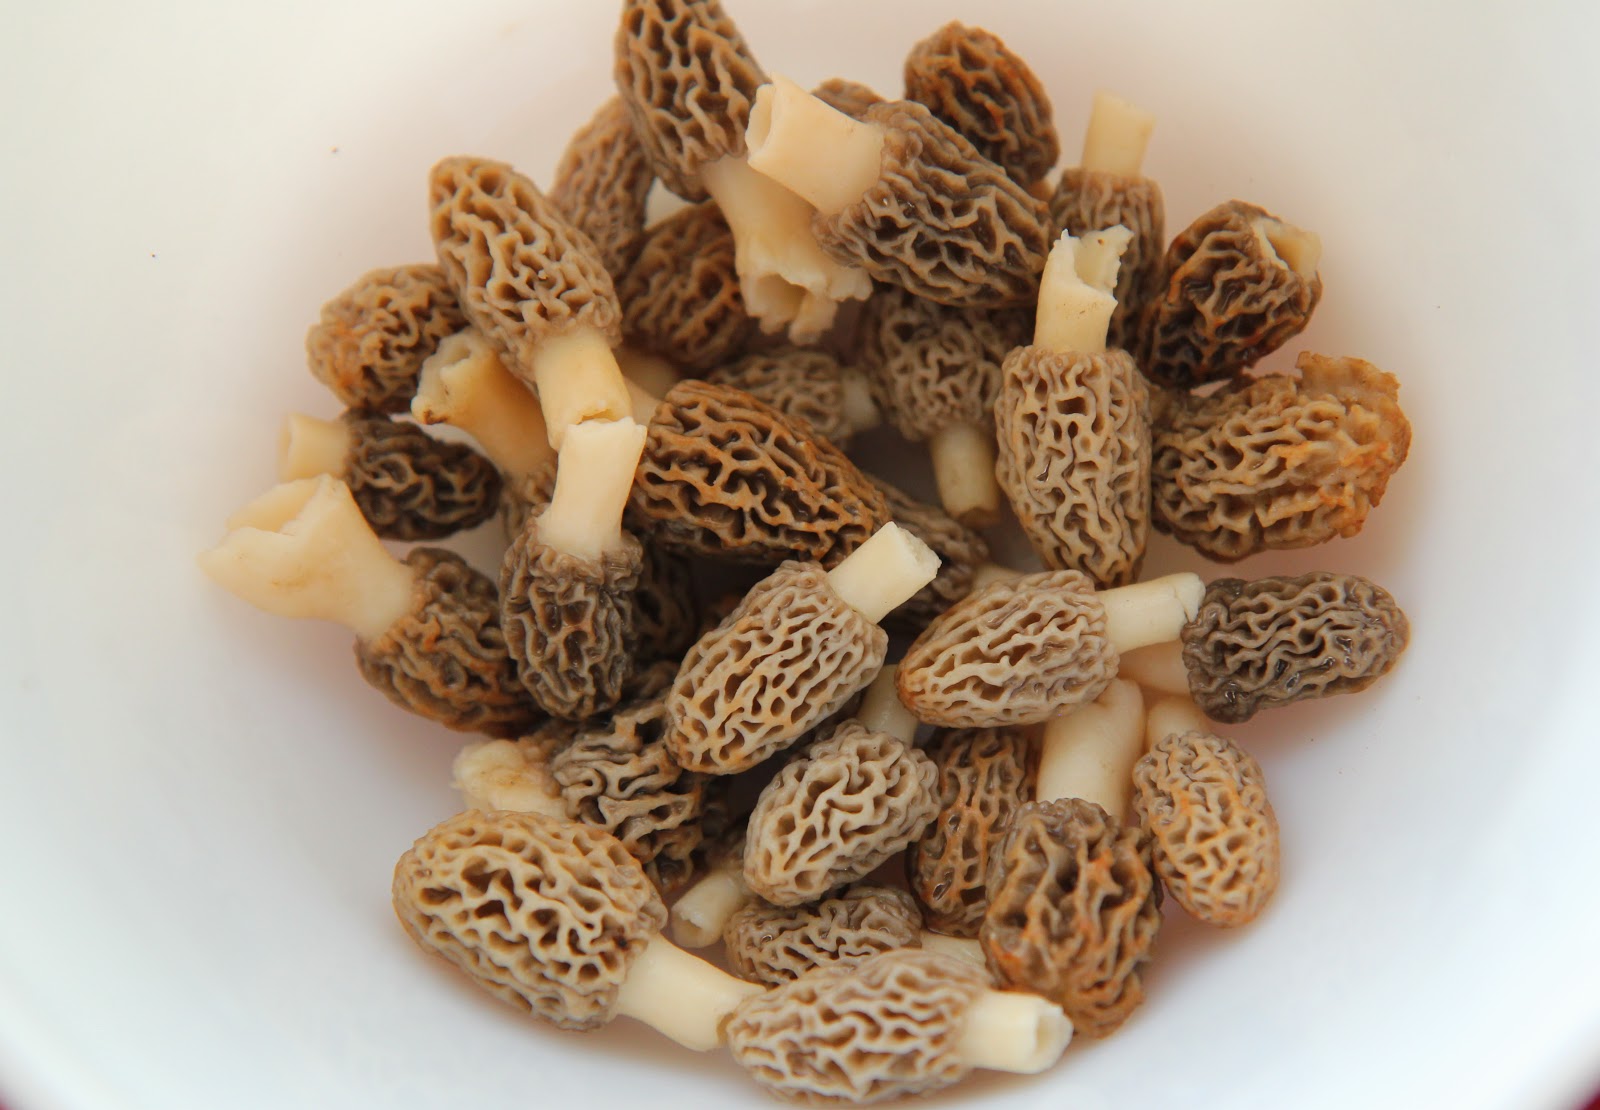 Morel mushrooms are a treat to find growing in the wild. See the proper way to identify morels, clean them for eating, and fry them for a delicious dinner!